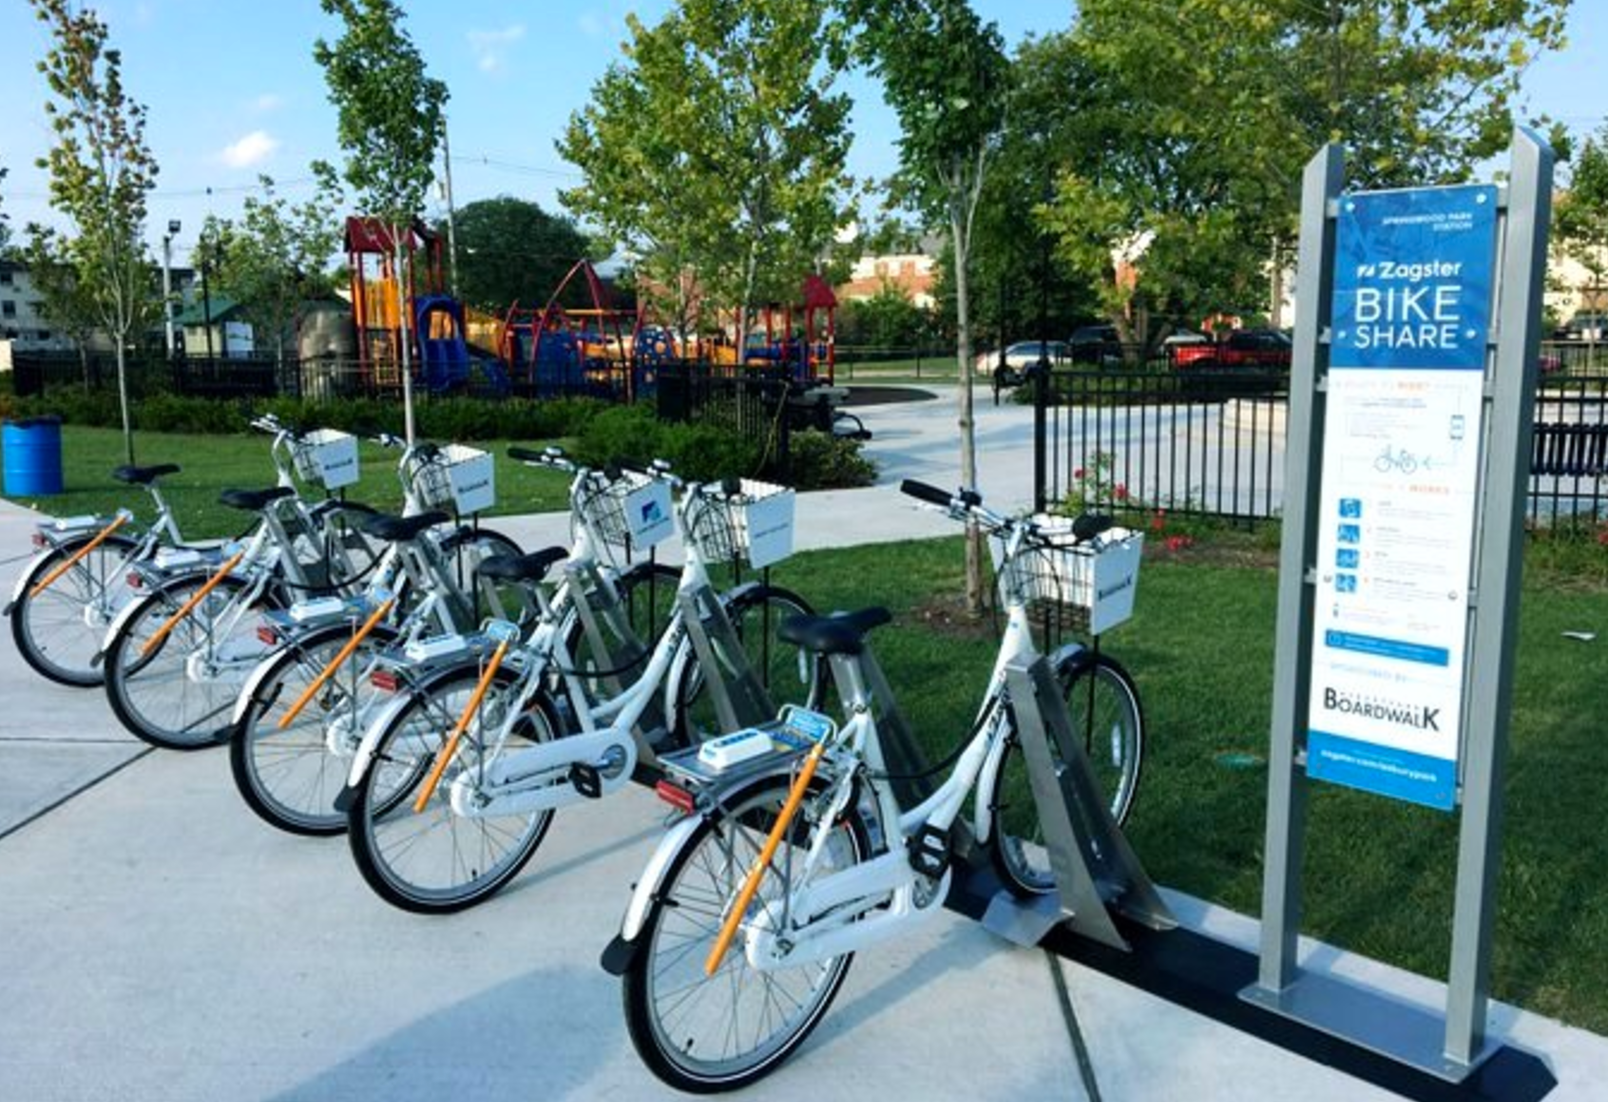 A bike share location in Asbury Park. (Image courtesy of the city of Asbury Park) 